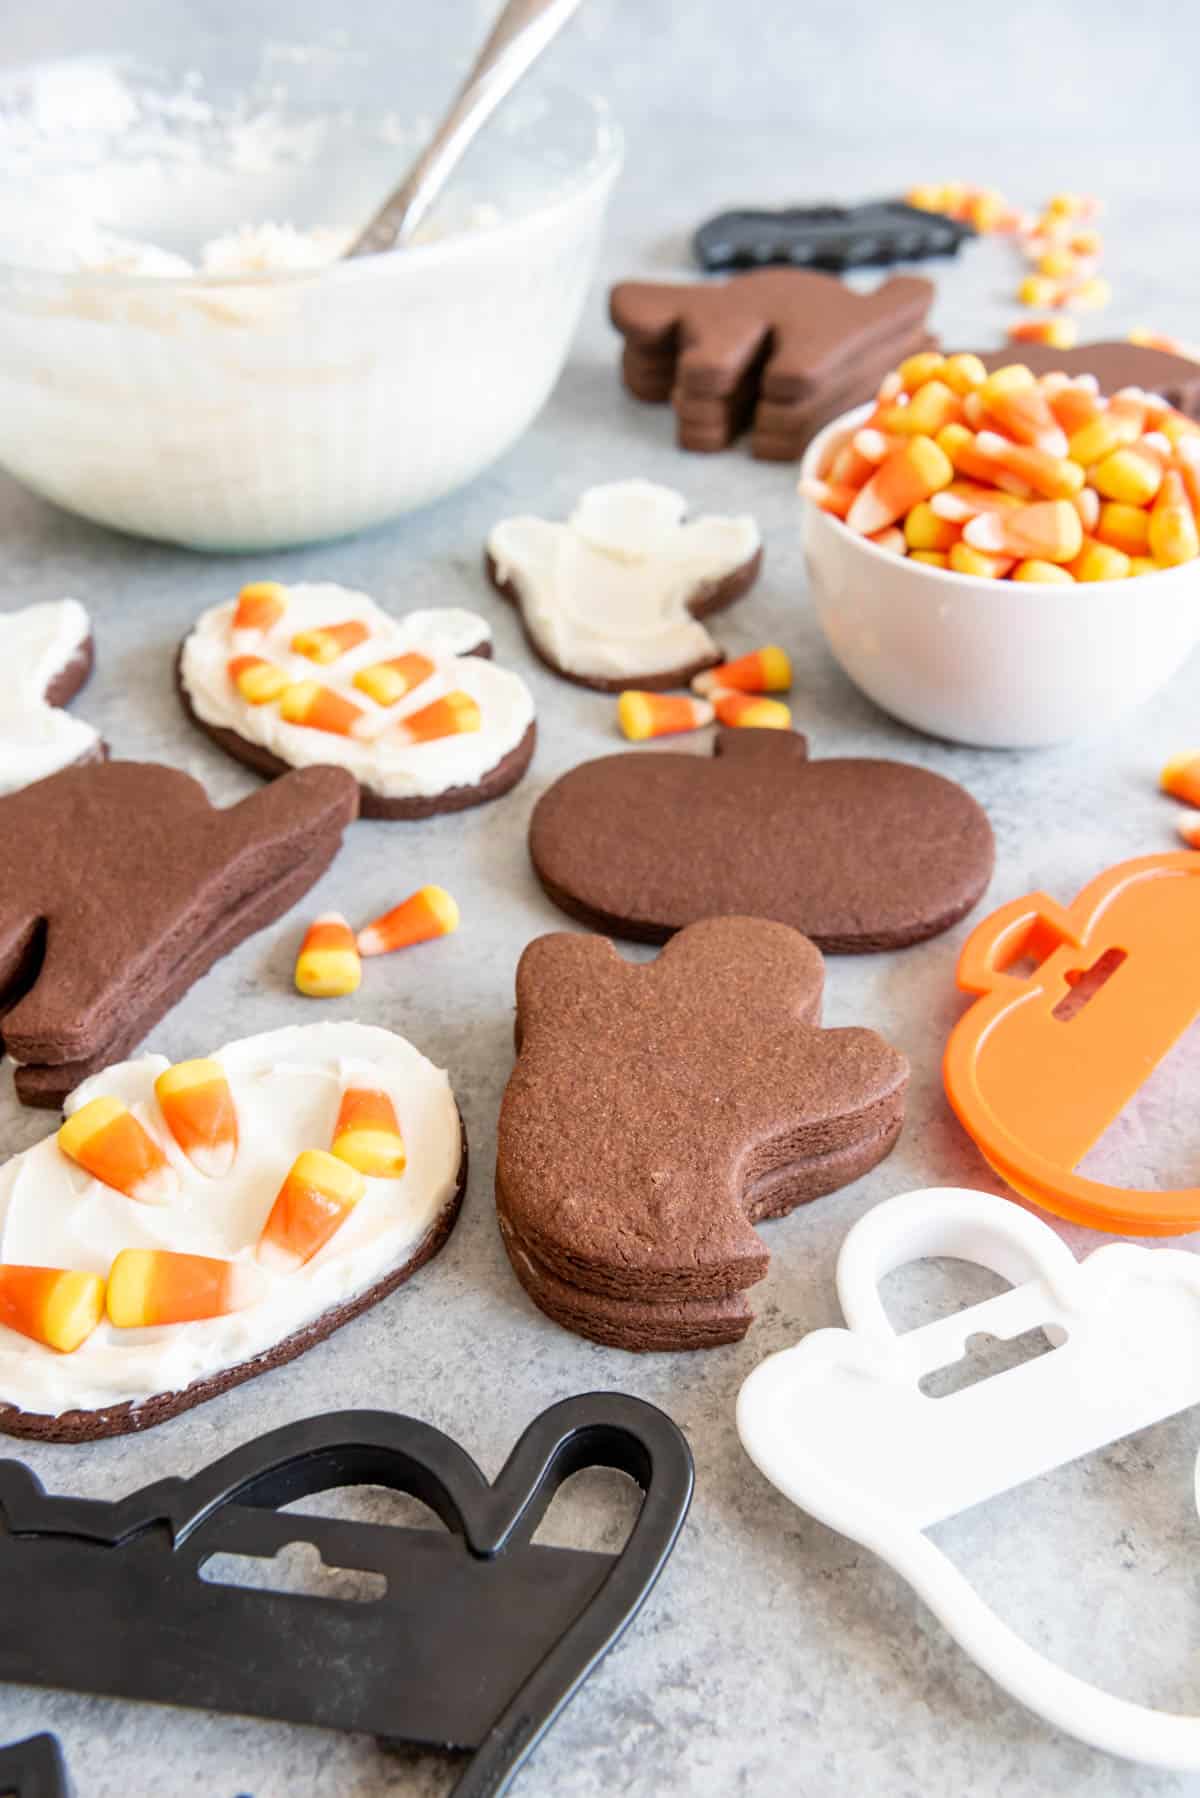 Bowls of candy corn and frosting used to decorate Halloween chocolate cut out sugar cookies.